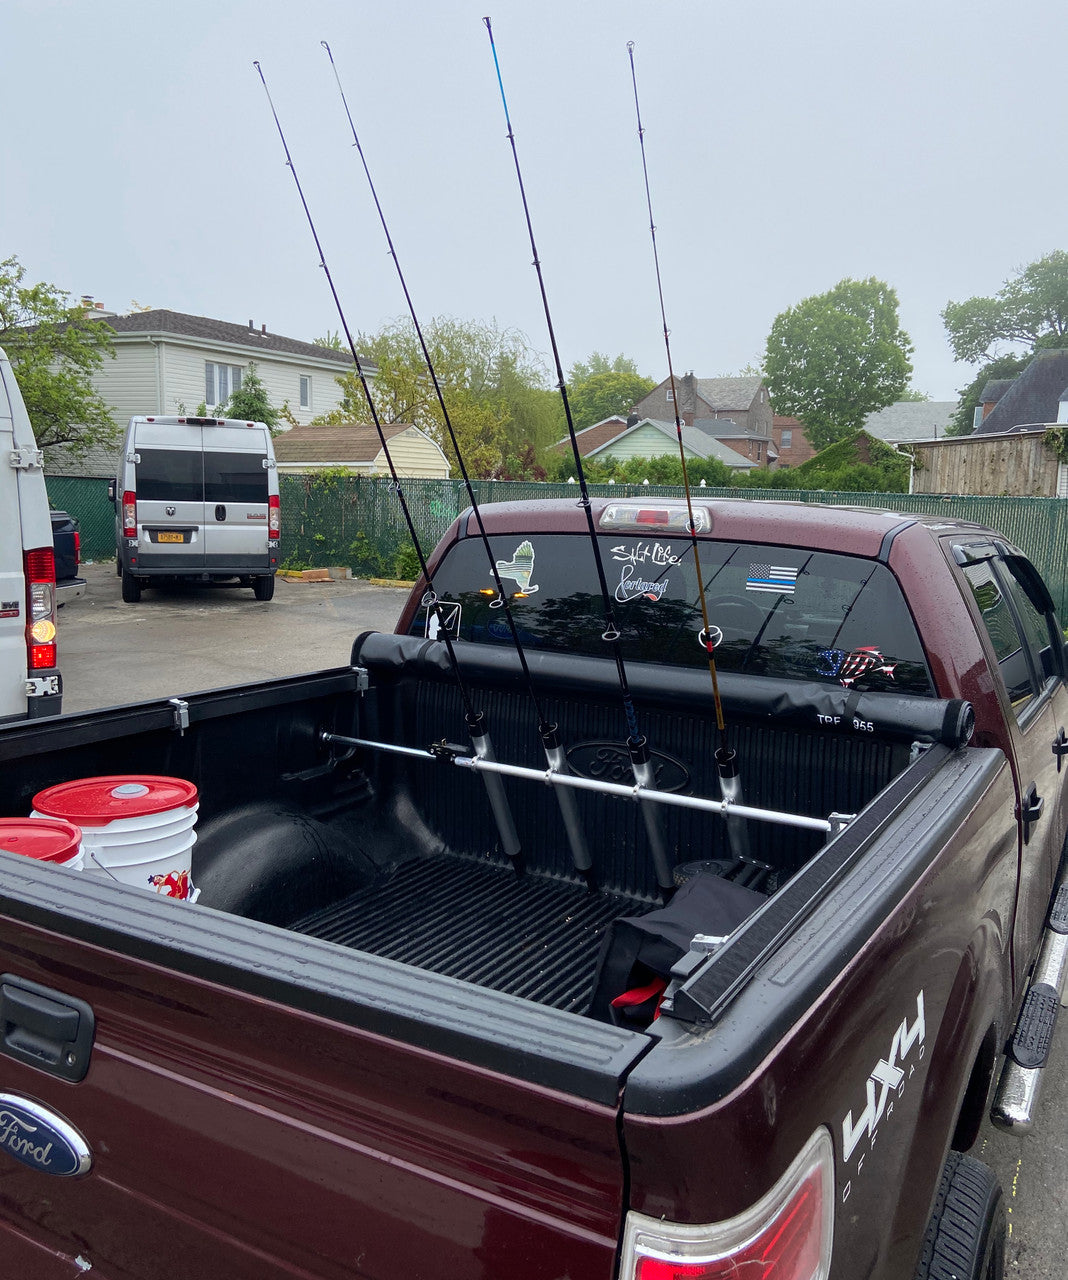 Good truck bed rod holder idea w/pic